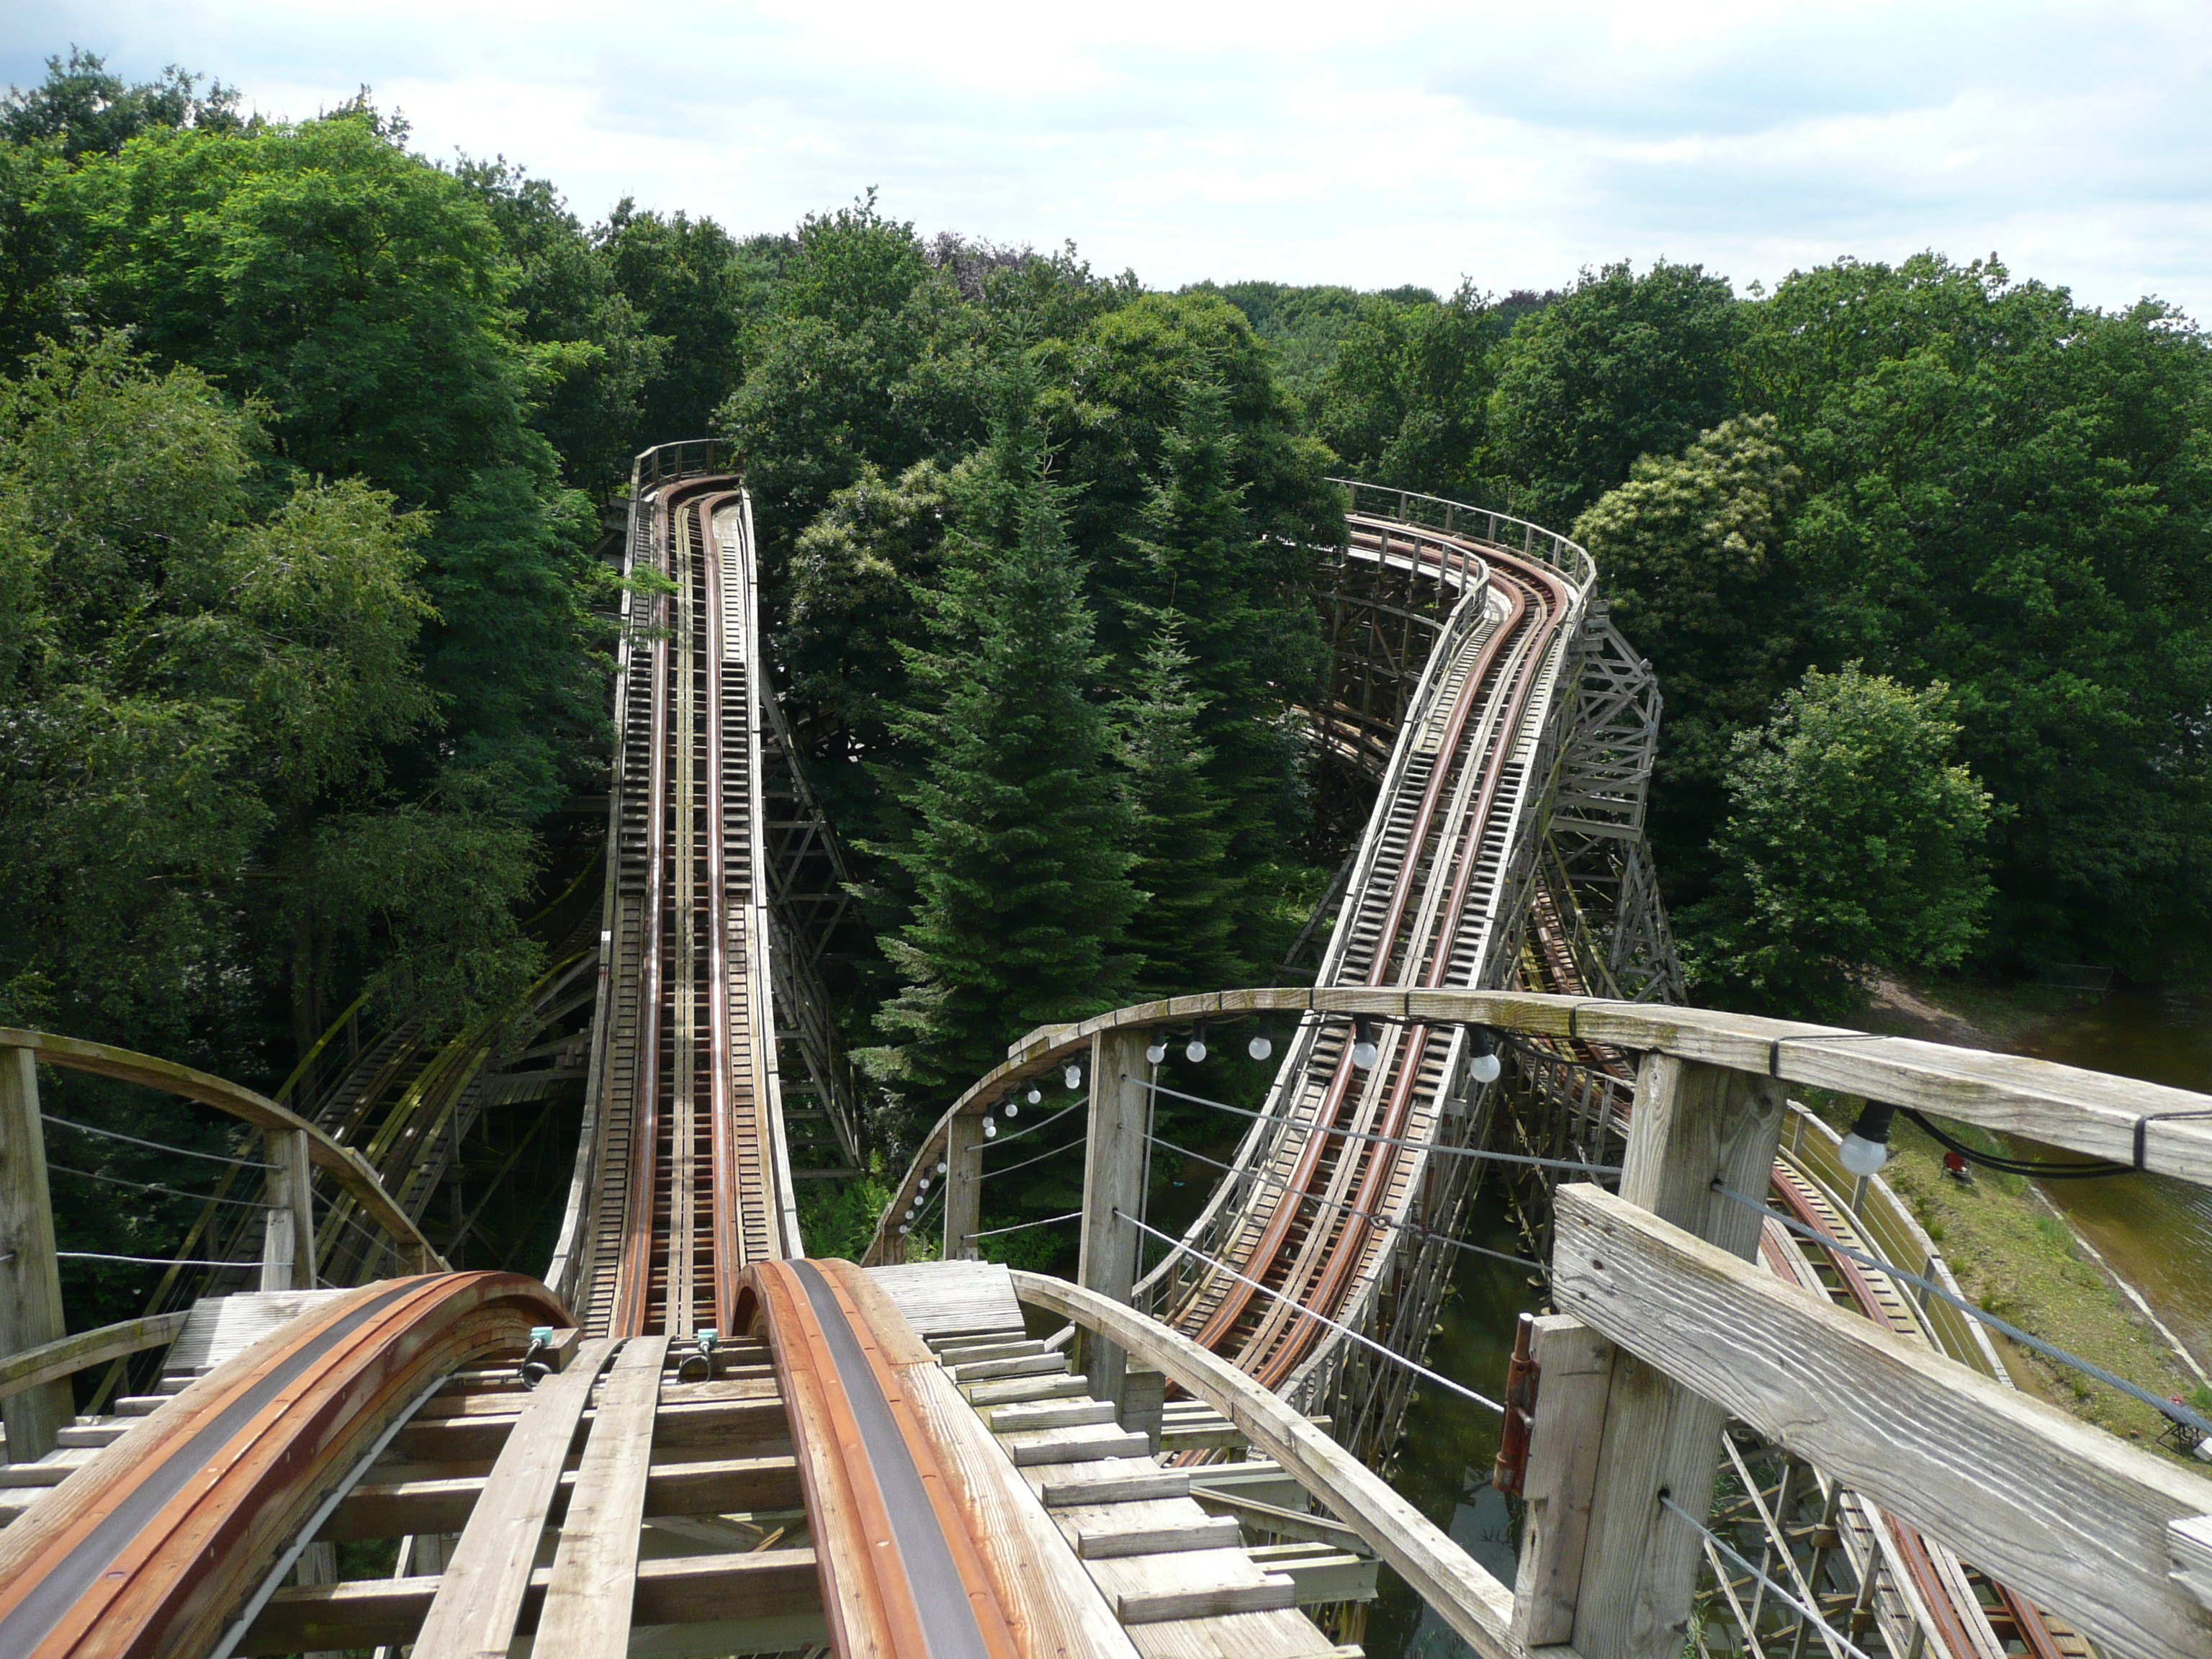 View of a wooden roller coaster track among green trees from the viewpoint of a person riding in the front car.